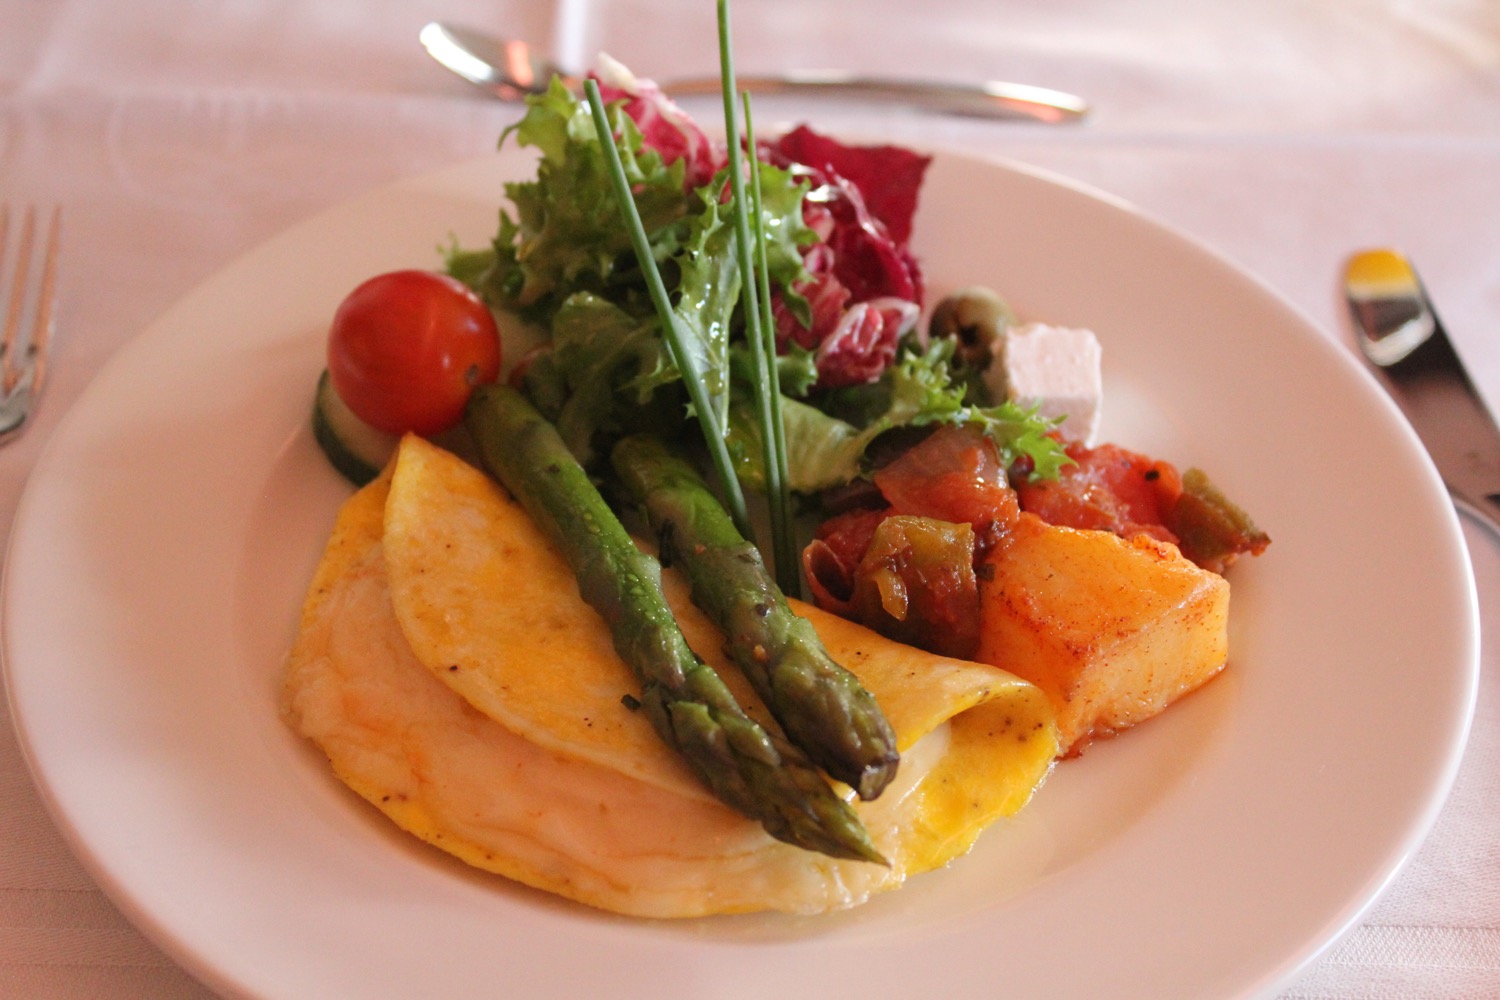 a plate of food with asparagus and vegetables